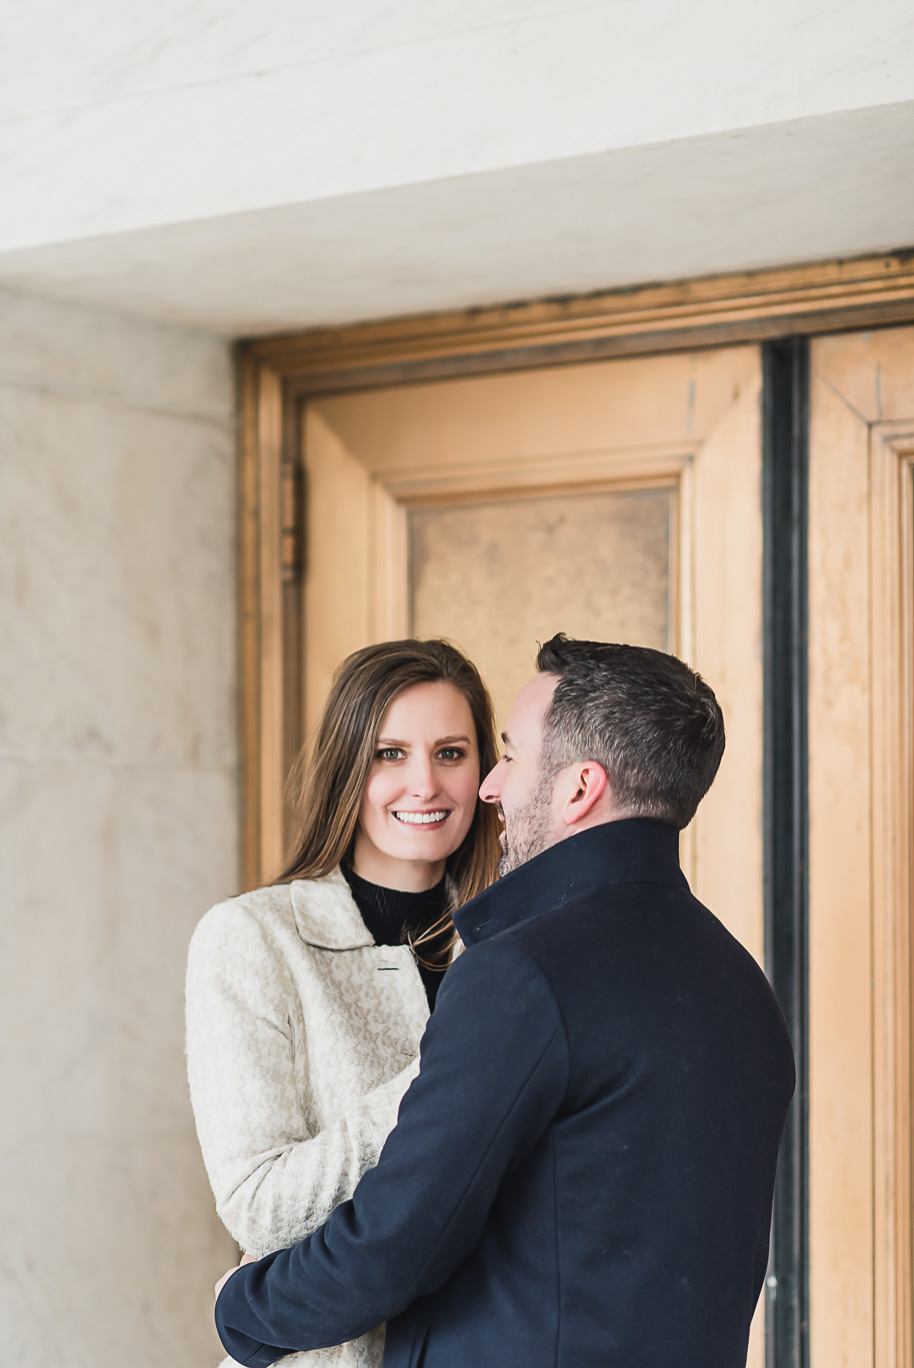 Downtown Detroit engagement photos in the winter at the Shinola Hotel and Detroit Institute of Arts with their adorable bernadoodle puppy by top-rated Detroit wedding photographer Kari Dawson.